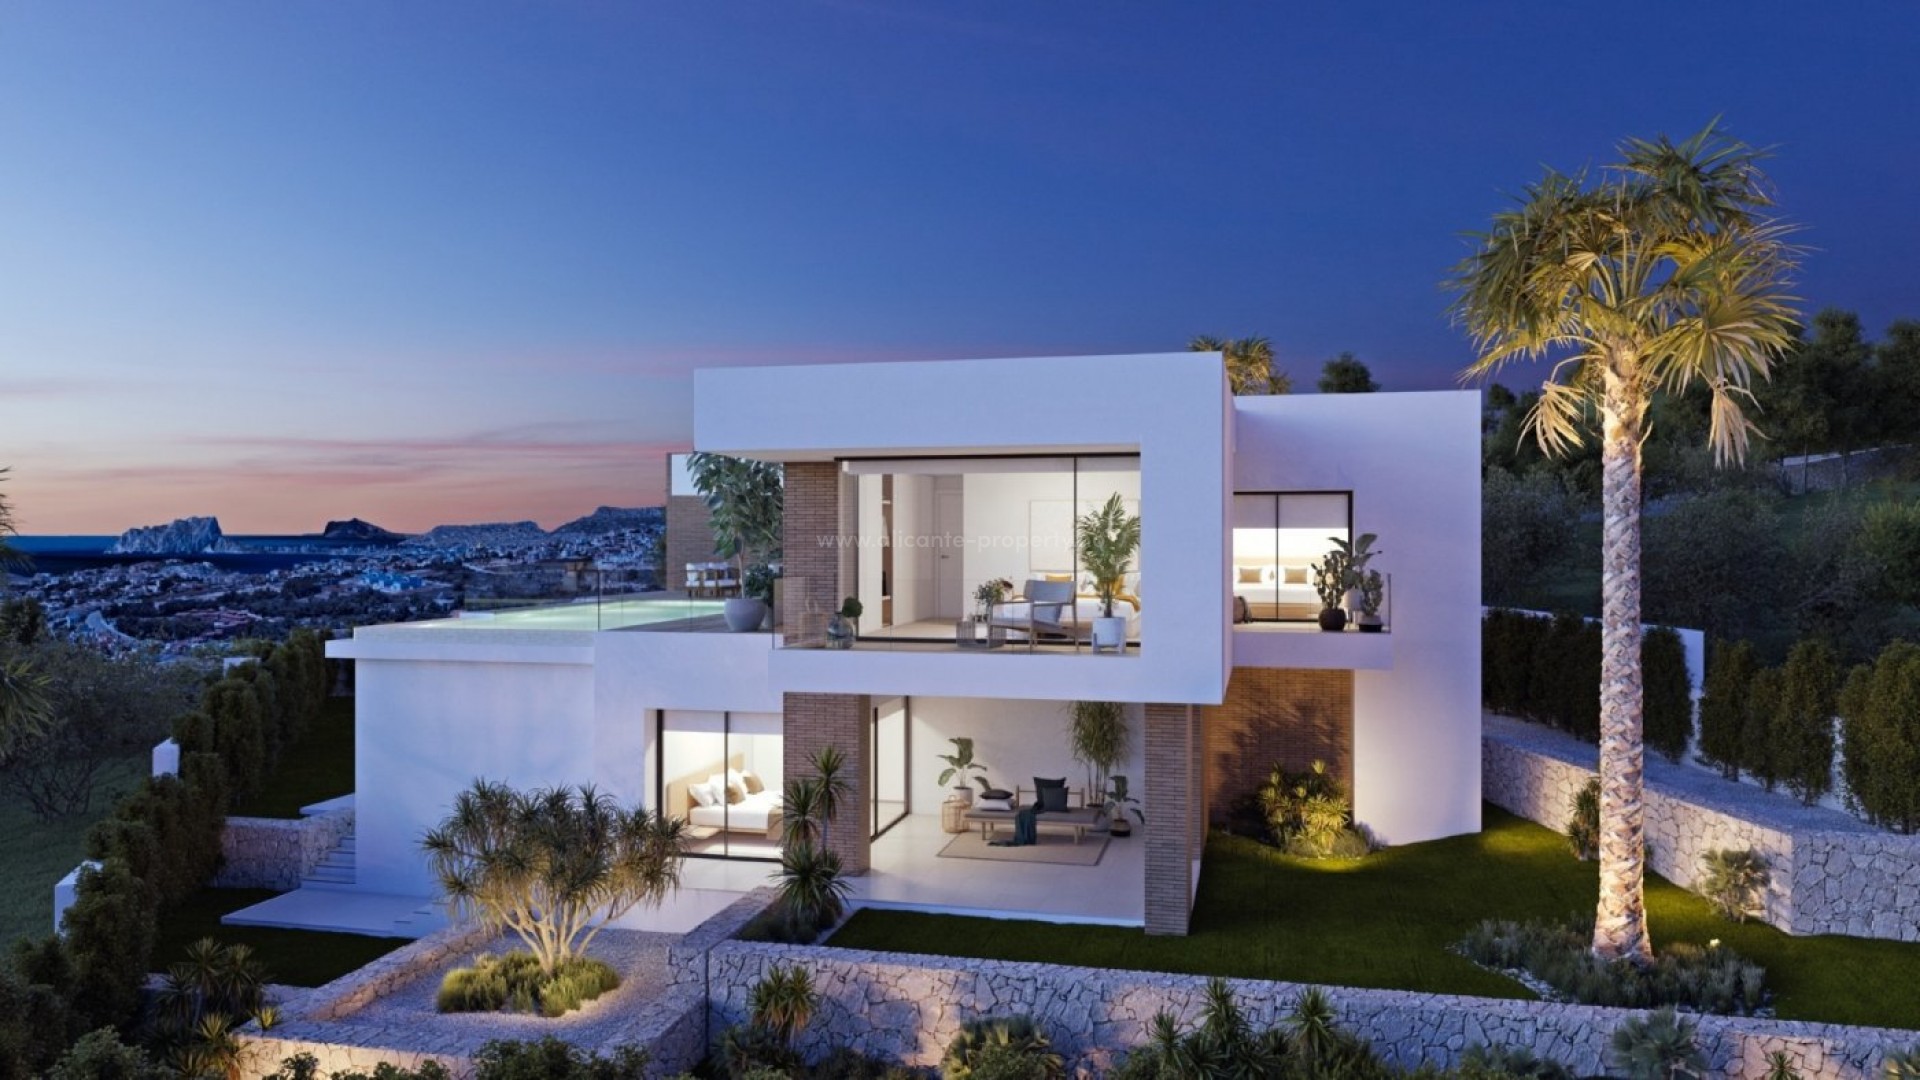 Newly built luxury villa in Benitachell, Cumbre del Sol, 3 bedrooms, 4 bathrooms, the terrace of more than 70 m² is dominated by an infinity pool, fantastic views